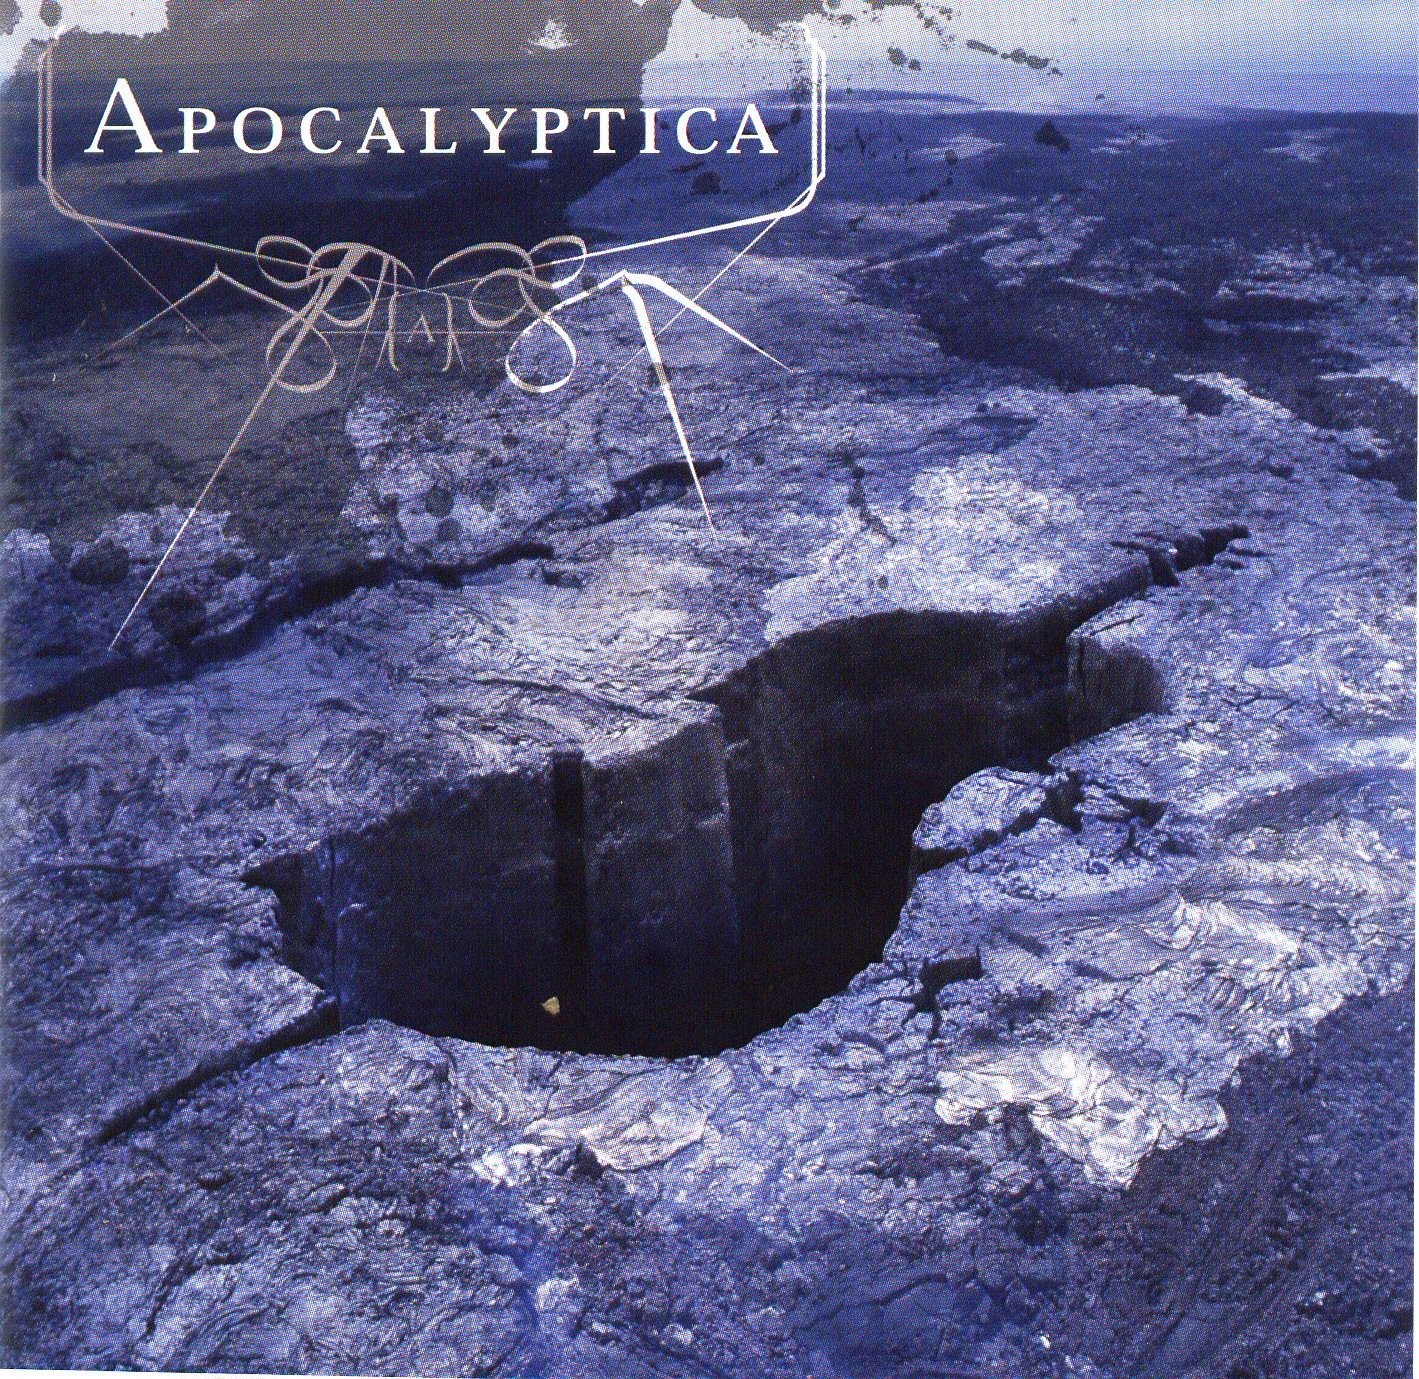 Apocalyptica - 2005 - Apocalyptica - AllCDCovers_apocalyptica_apocalyptica_2005_retail_cd-front.jpg